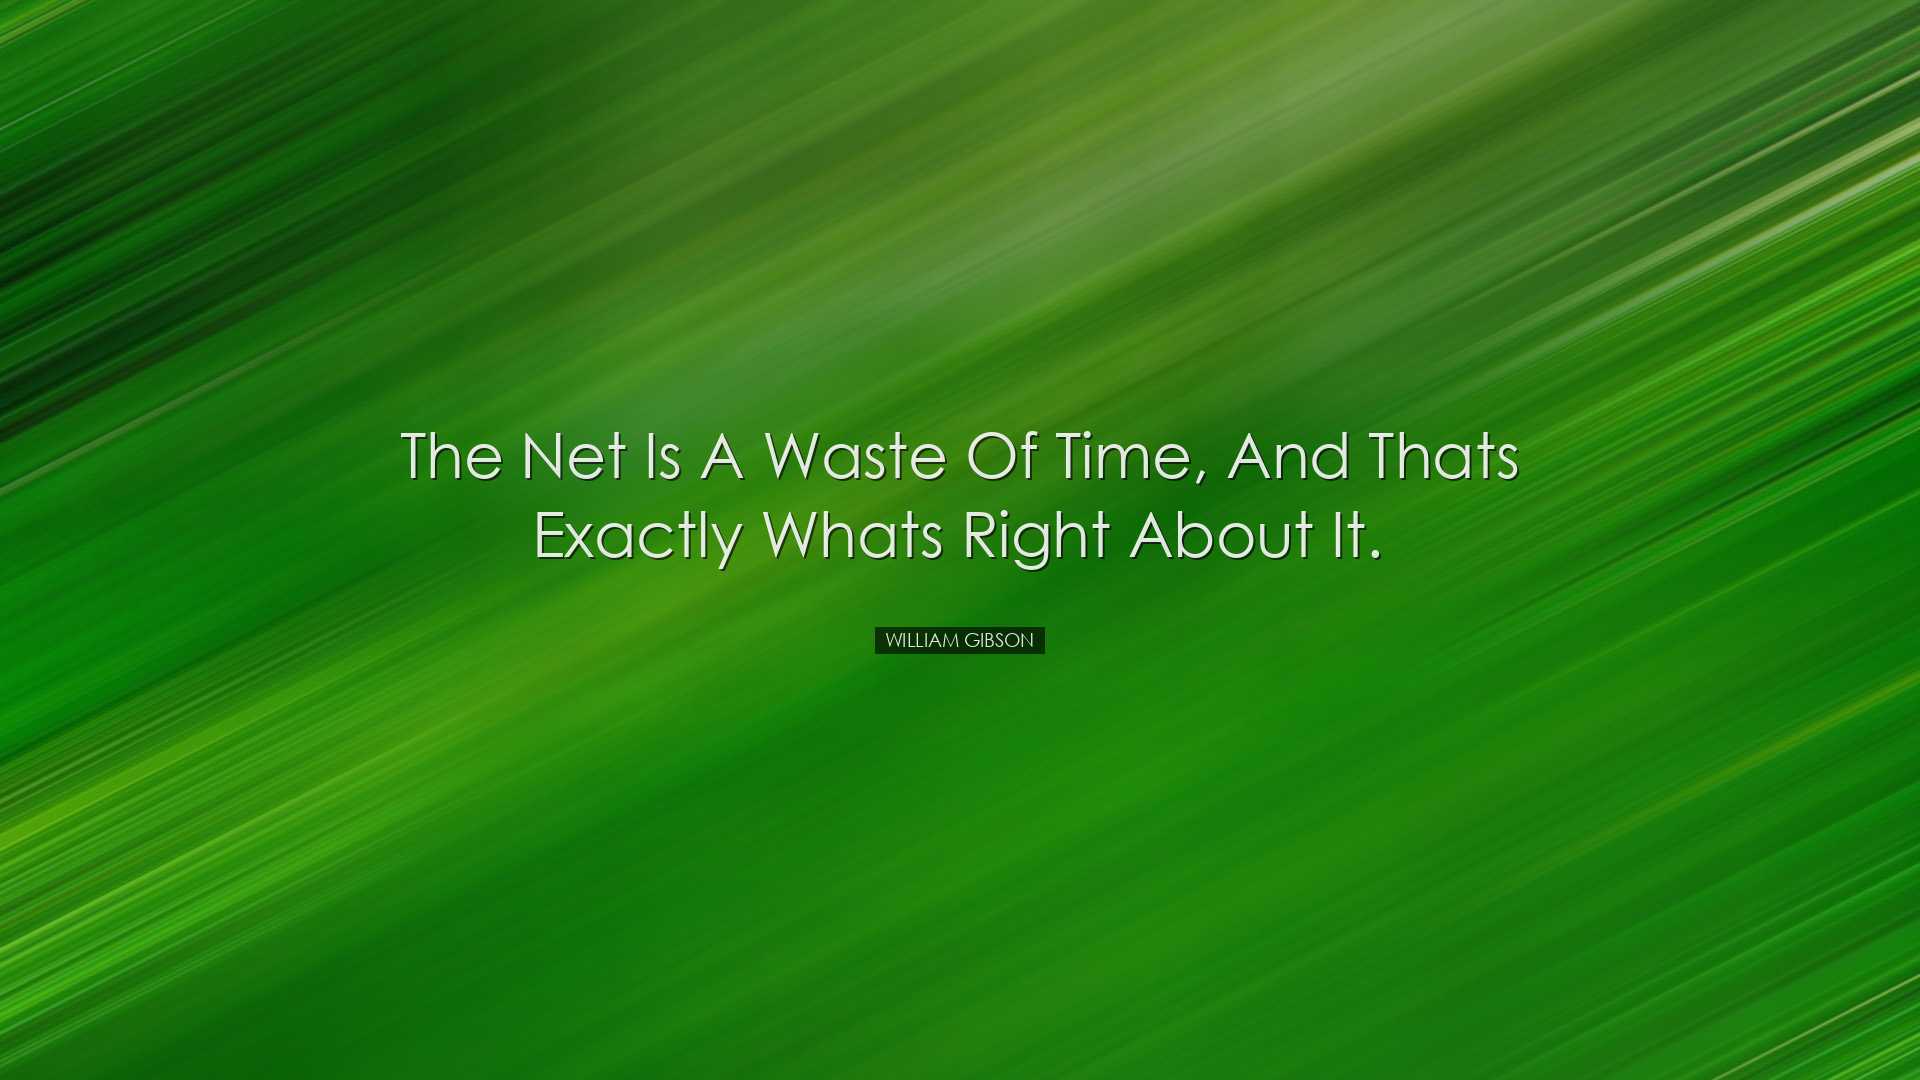 The Net is a waste of time, and thats exactly whats right about it